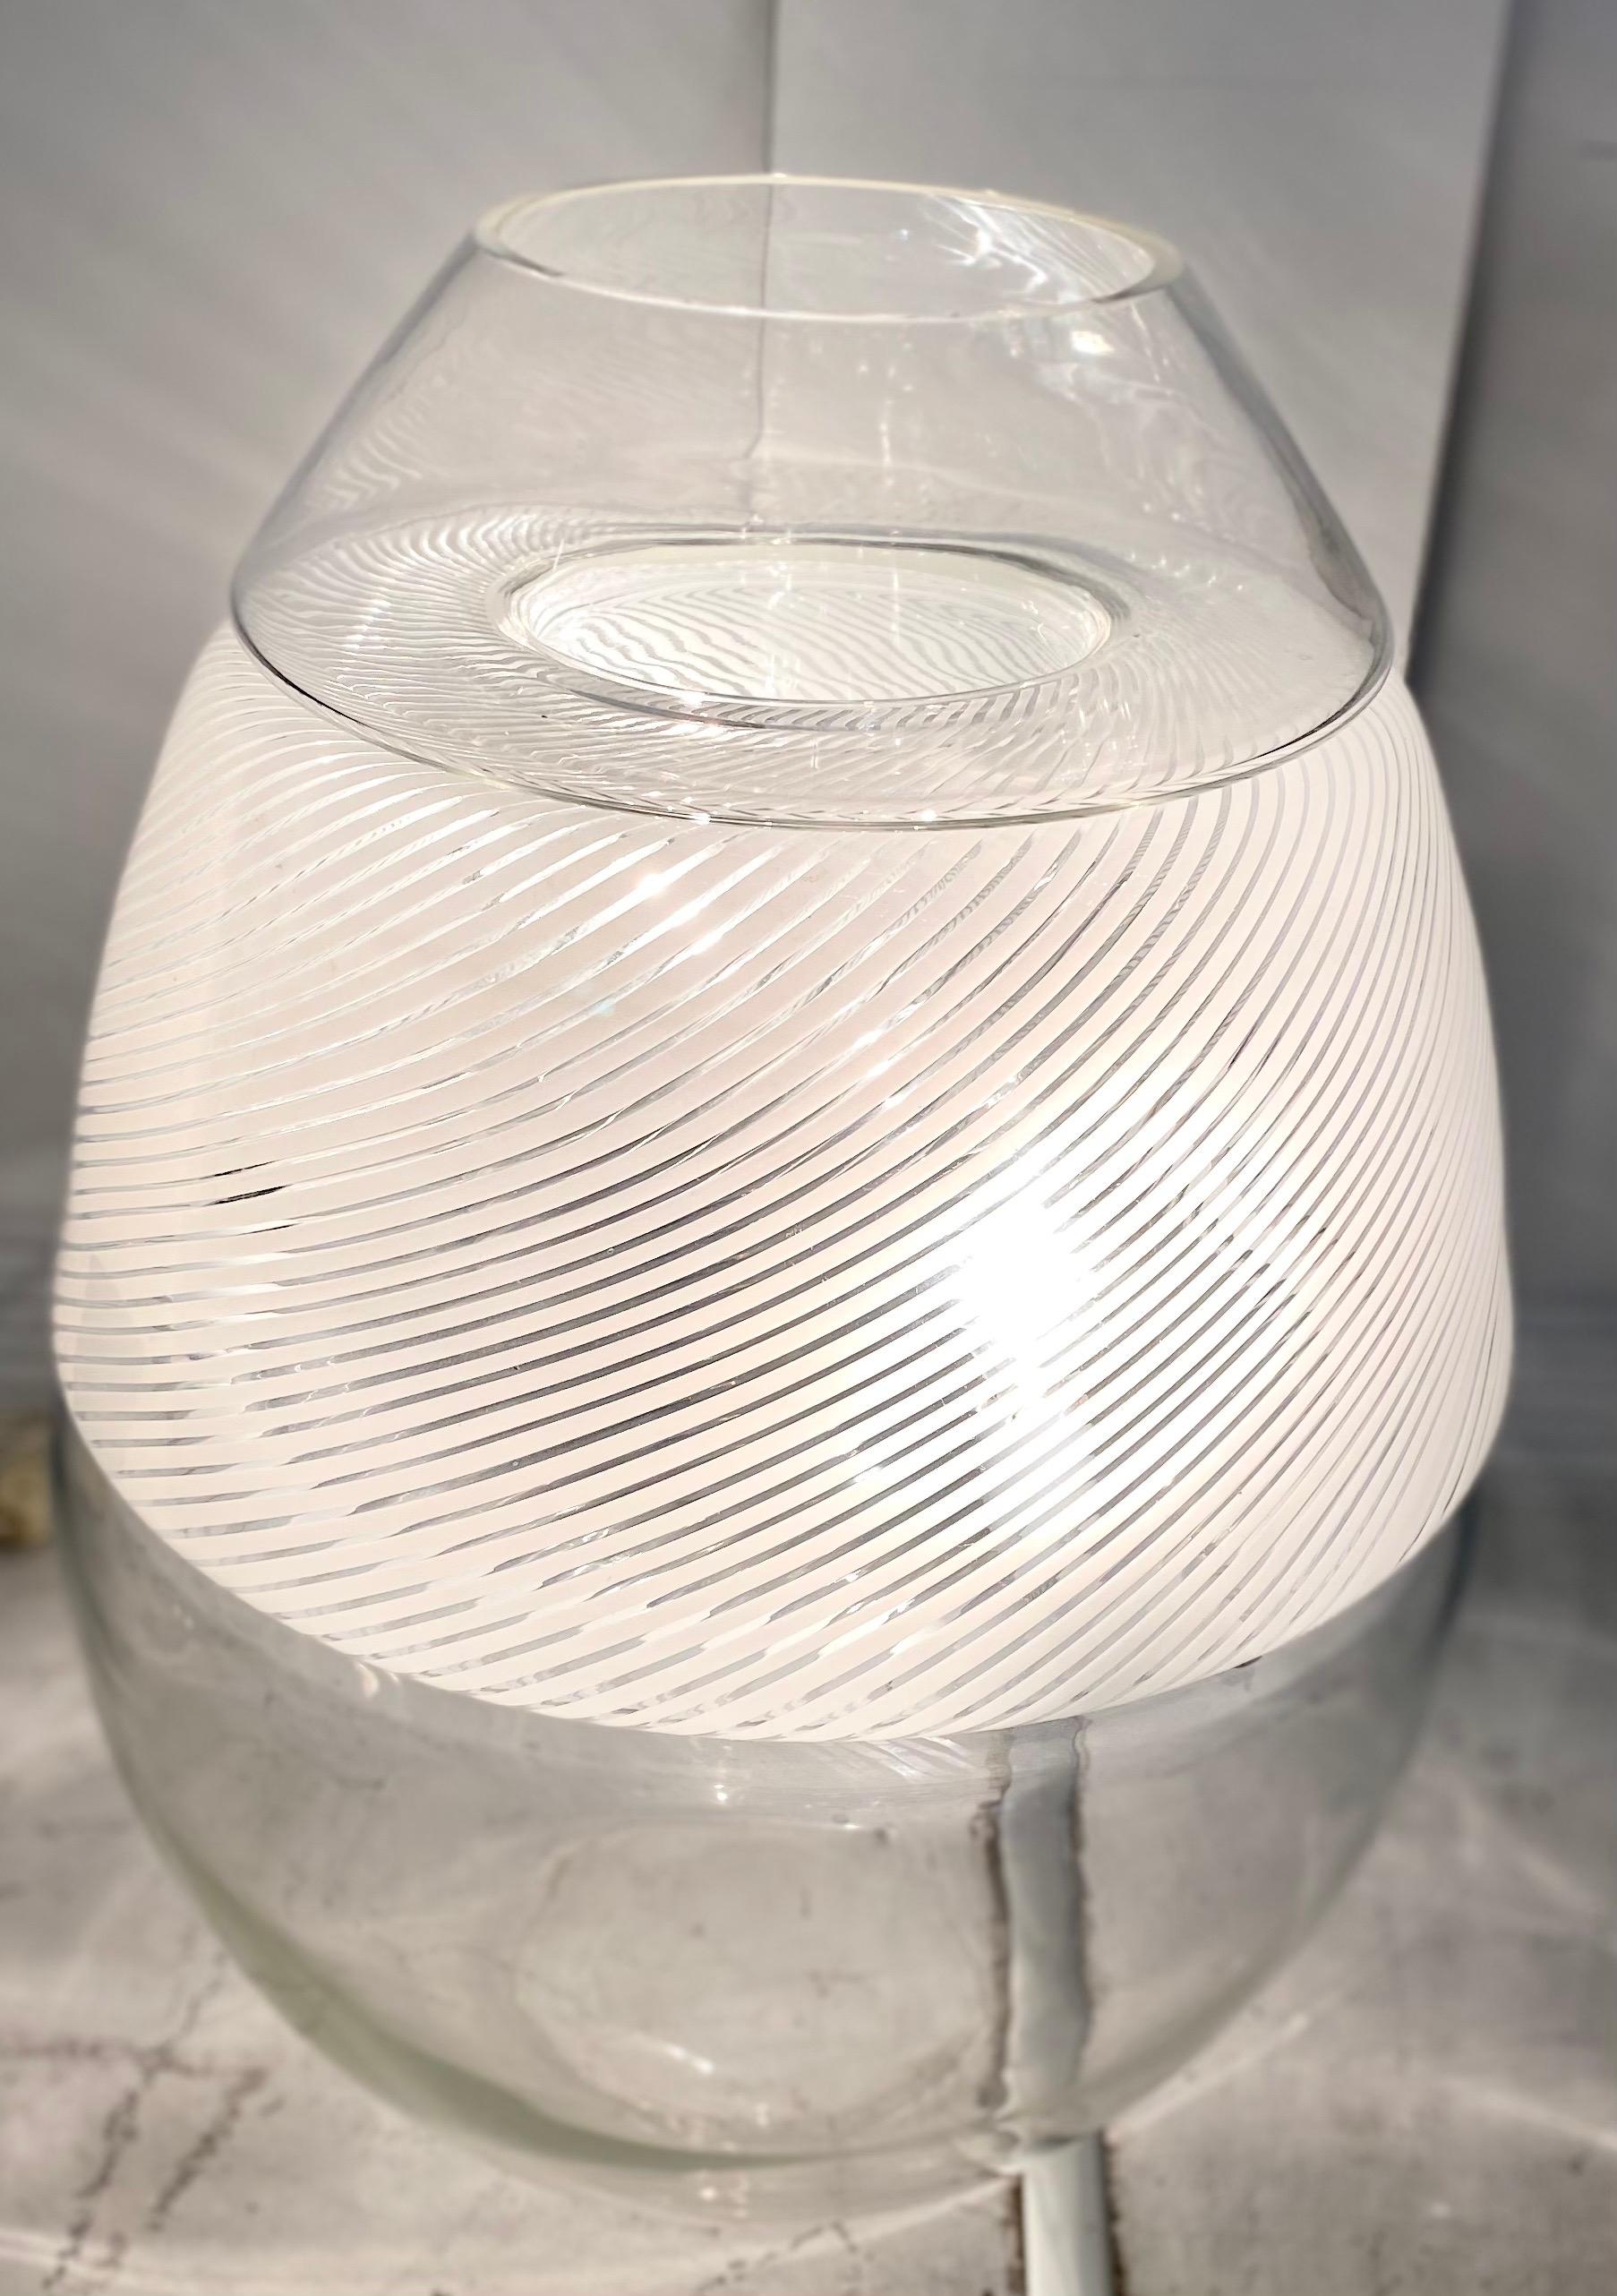 Incredible and rare large mid-century glass Arte Vetro Murano egg lamp. It is a stack of three separate blown glass pieces. The center piece is swirled glass with the lighting apparatus. The top and bottom are a solid clear glass. Made by Vetri